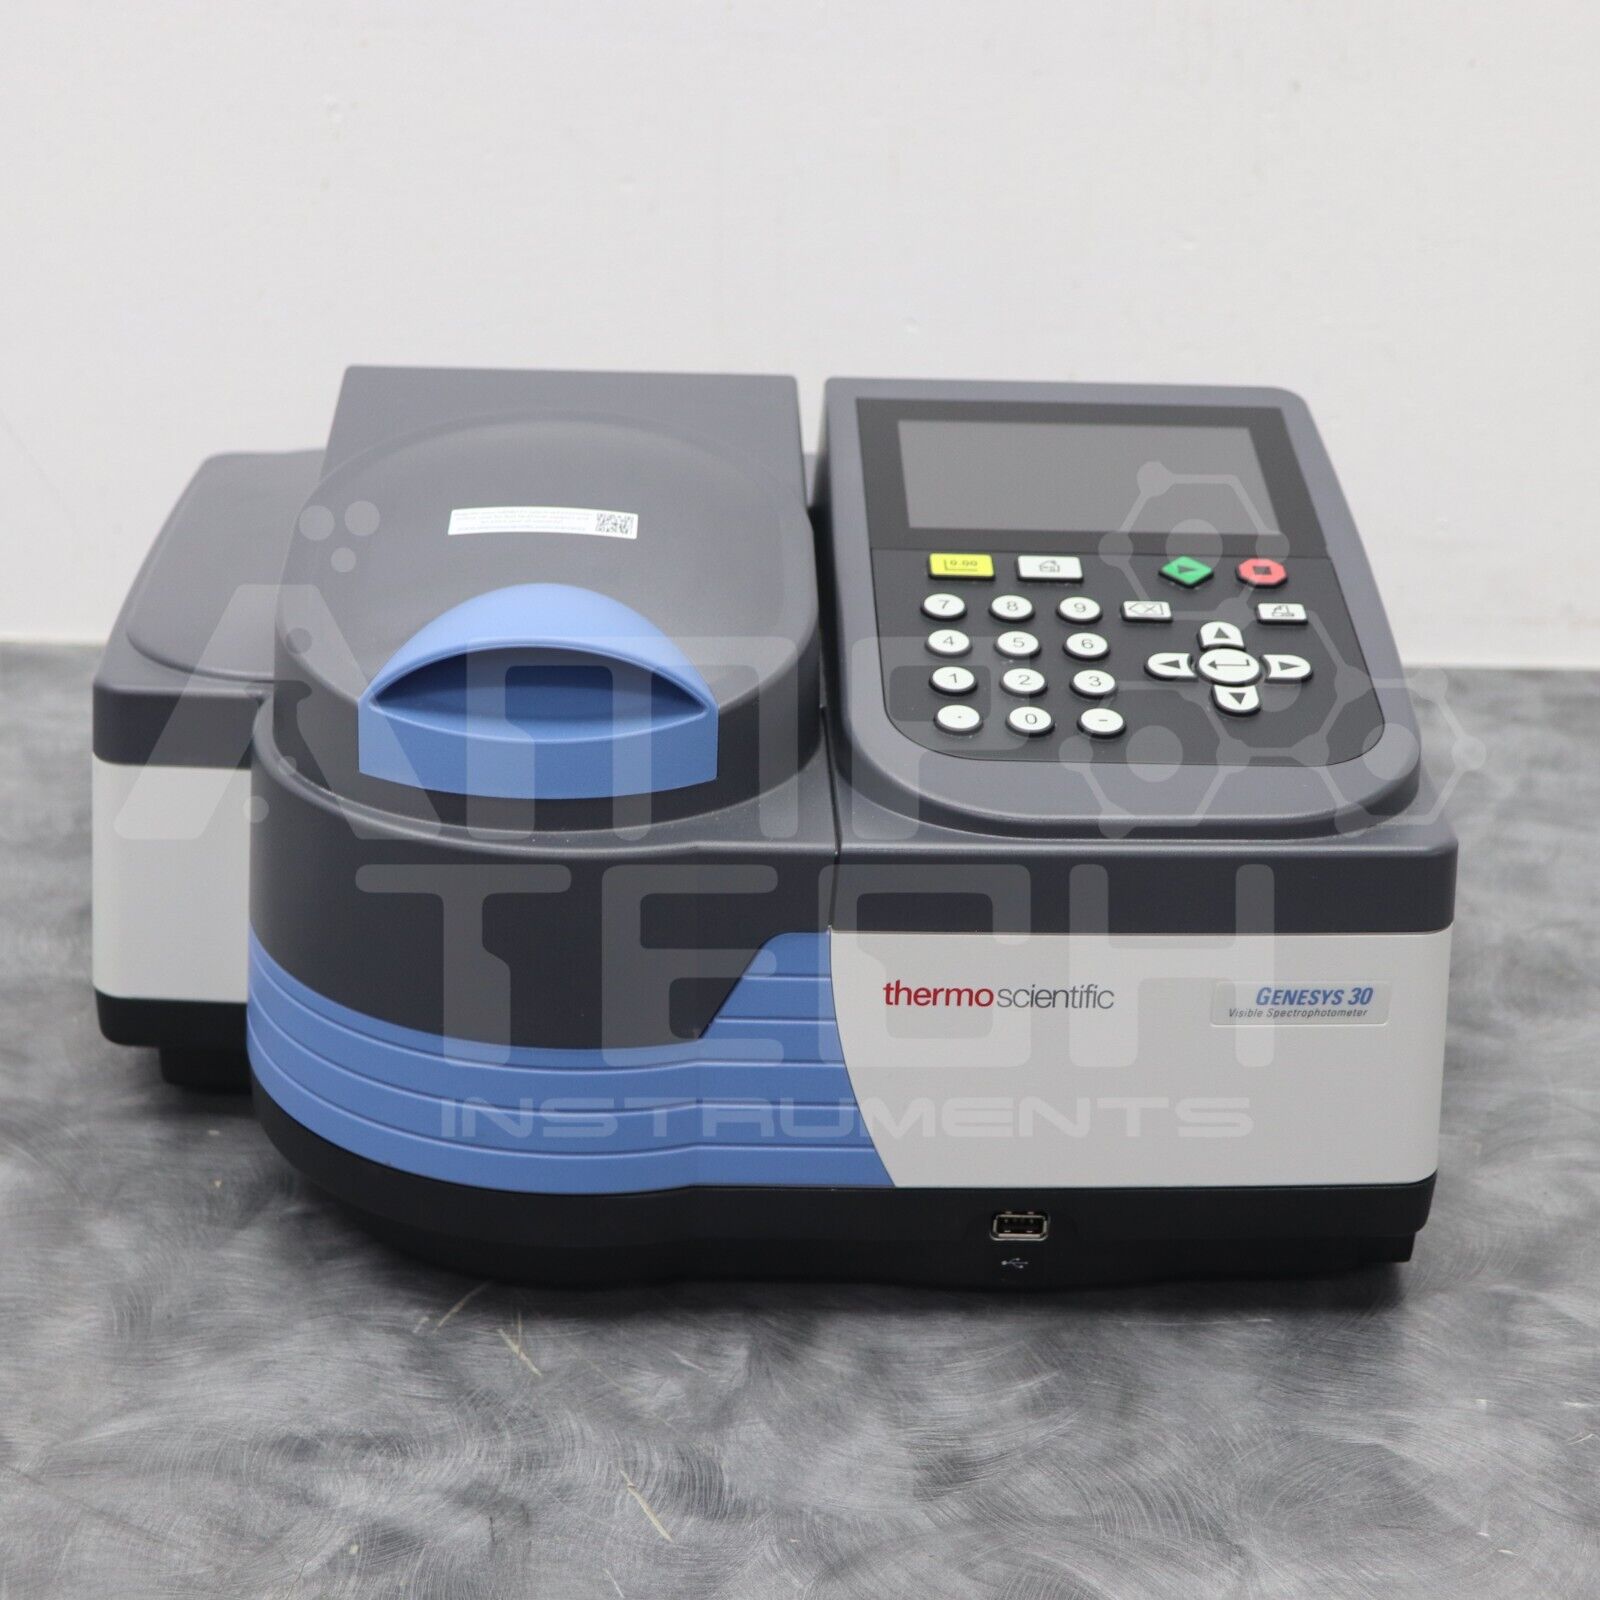 Thermo Scientific GENESYS 30 VIS Spectrophotometer - 21 Hours